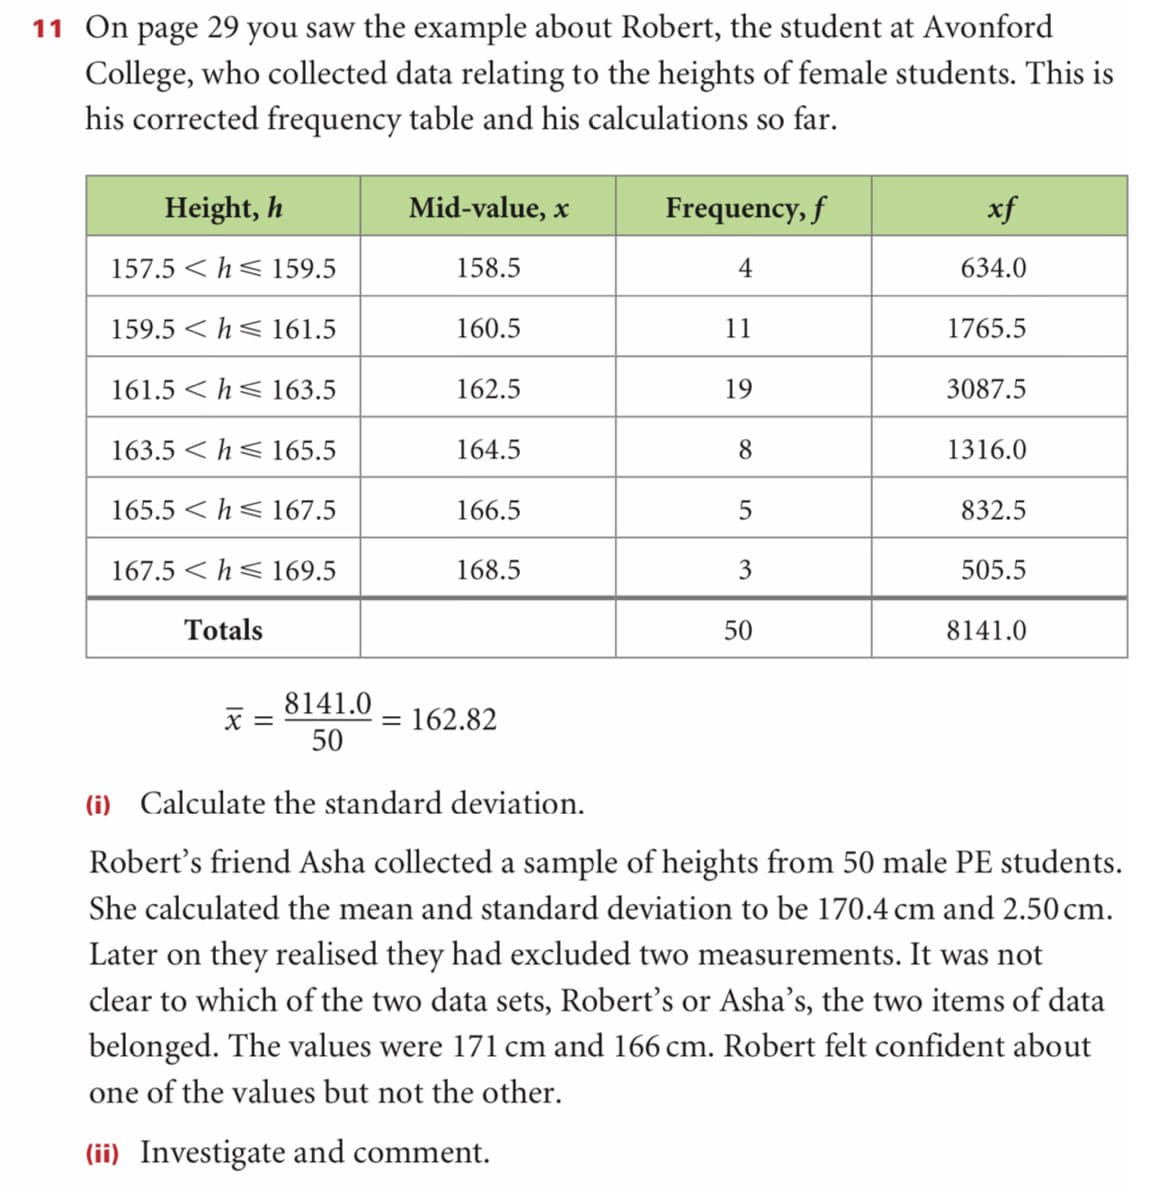 11 On page 29 you saw the example about Robert, the student at Avonford
College, who collected data relating to the heights of female students. This is
his corrected frequency table and his calculations so far.
Height, h
Mid-value, x
Frequency, f
xf
157.5 <h< 159.5
158.5
4
634.0
159.5 <h<161.5
160.5
11
1765.5
161.5 <h< 163.5
162.5
19
3087.5
163.5 <h<165.5
164.5
8.
1316.0
165.5 < h< 167.5
166.5
5
832.5
167.5 <h<169.5
168.5
505.5
Totals
50
8141.0
8141.0
= 162.82
%3D
50
(i) Calculate the standard deviation.
Robert's friend Asha collected a sample of heights from 50 male PE students.
She calculated the mean and standard deviation to be 170.4 cm and 2.50 cm.
Later on they realised they had excluded two measurements. It was not
clear to which of the two data sets, Robert's or Asha's, the two items of data
belonged. The values were 171 cm and 166 cm. Robert felt confident about
one of the values but not the other.
(ii) Investigate and comment.
3.
